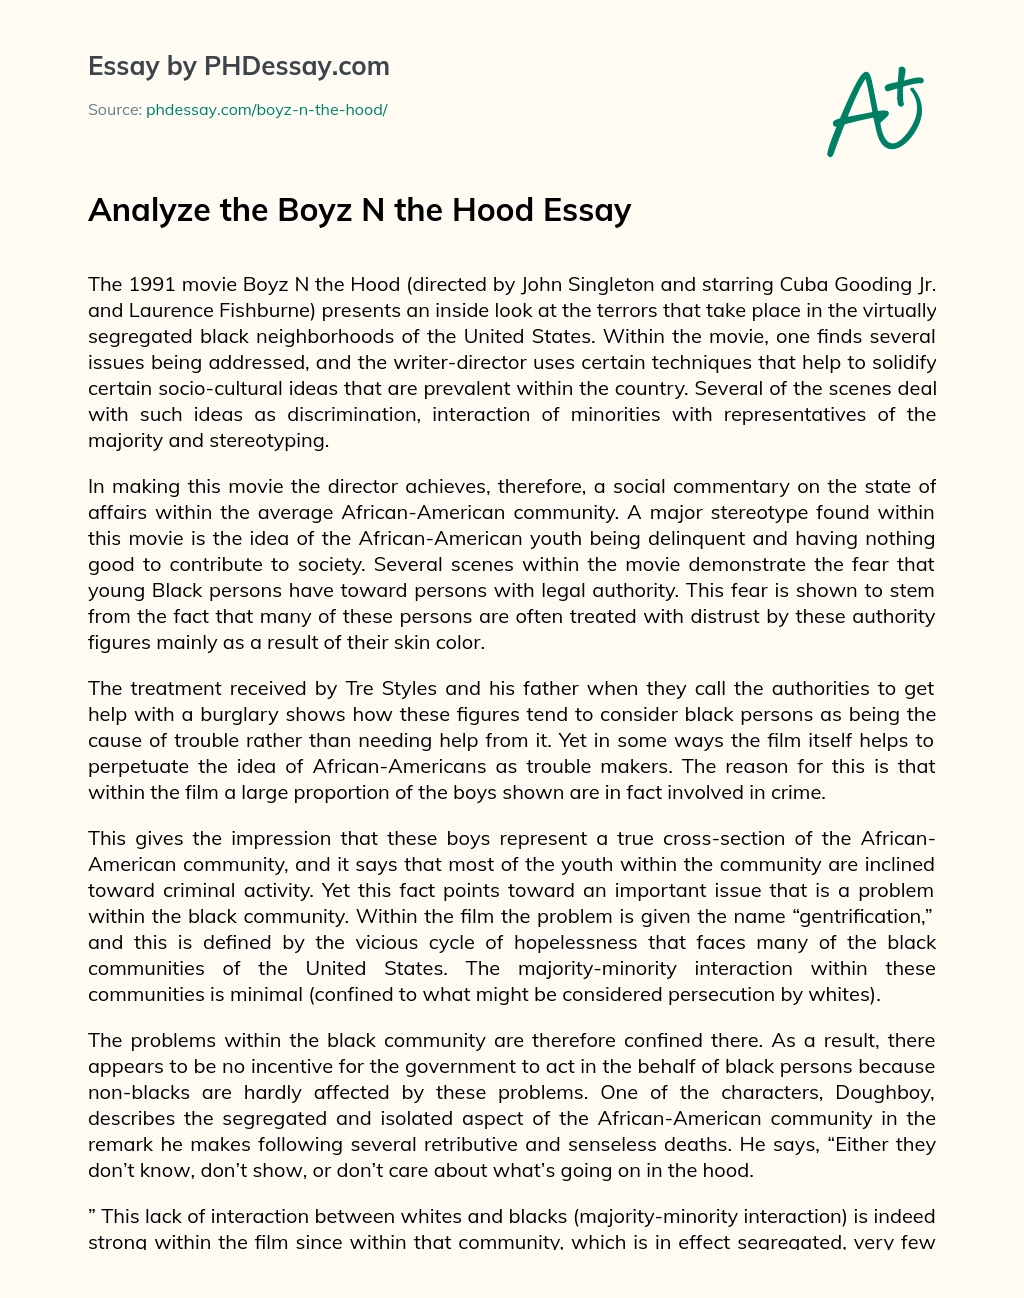 Boyz N the Hood: A Social Commentary on African-American Communities and Stereotyping essay